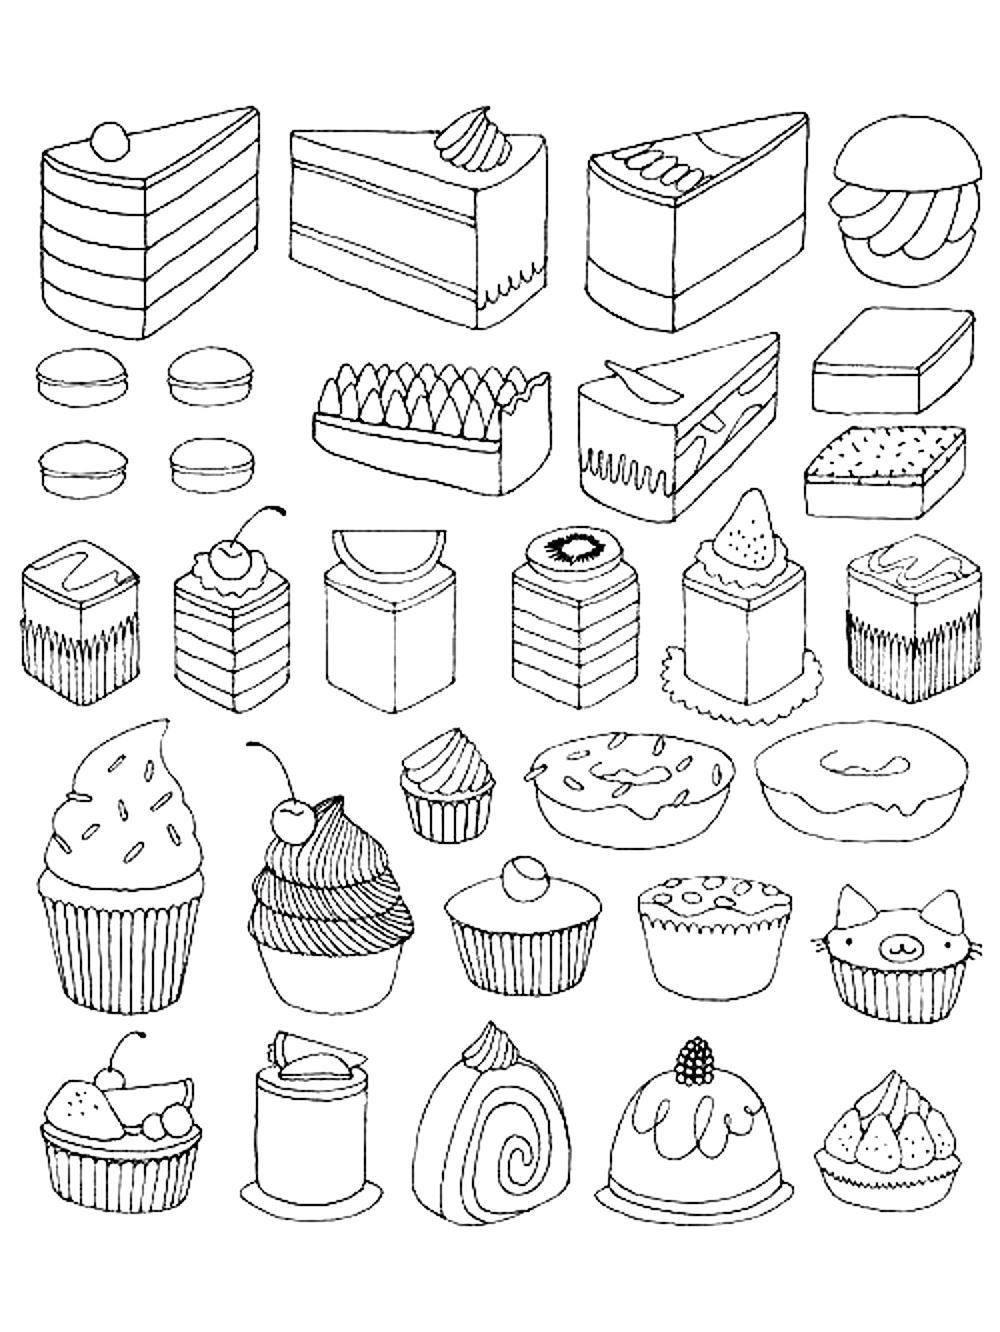 Cup Cake - Coloring Pages for adults